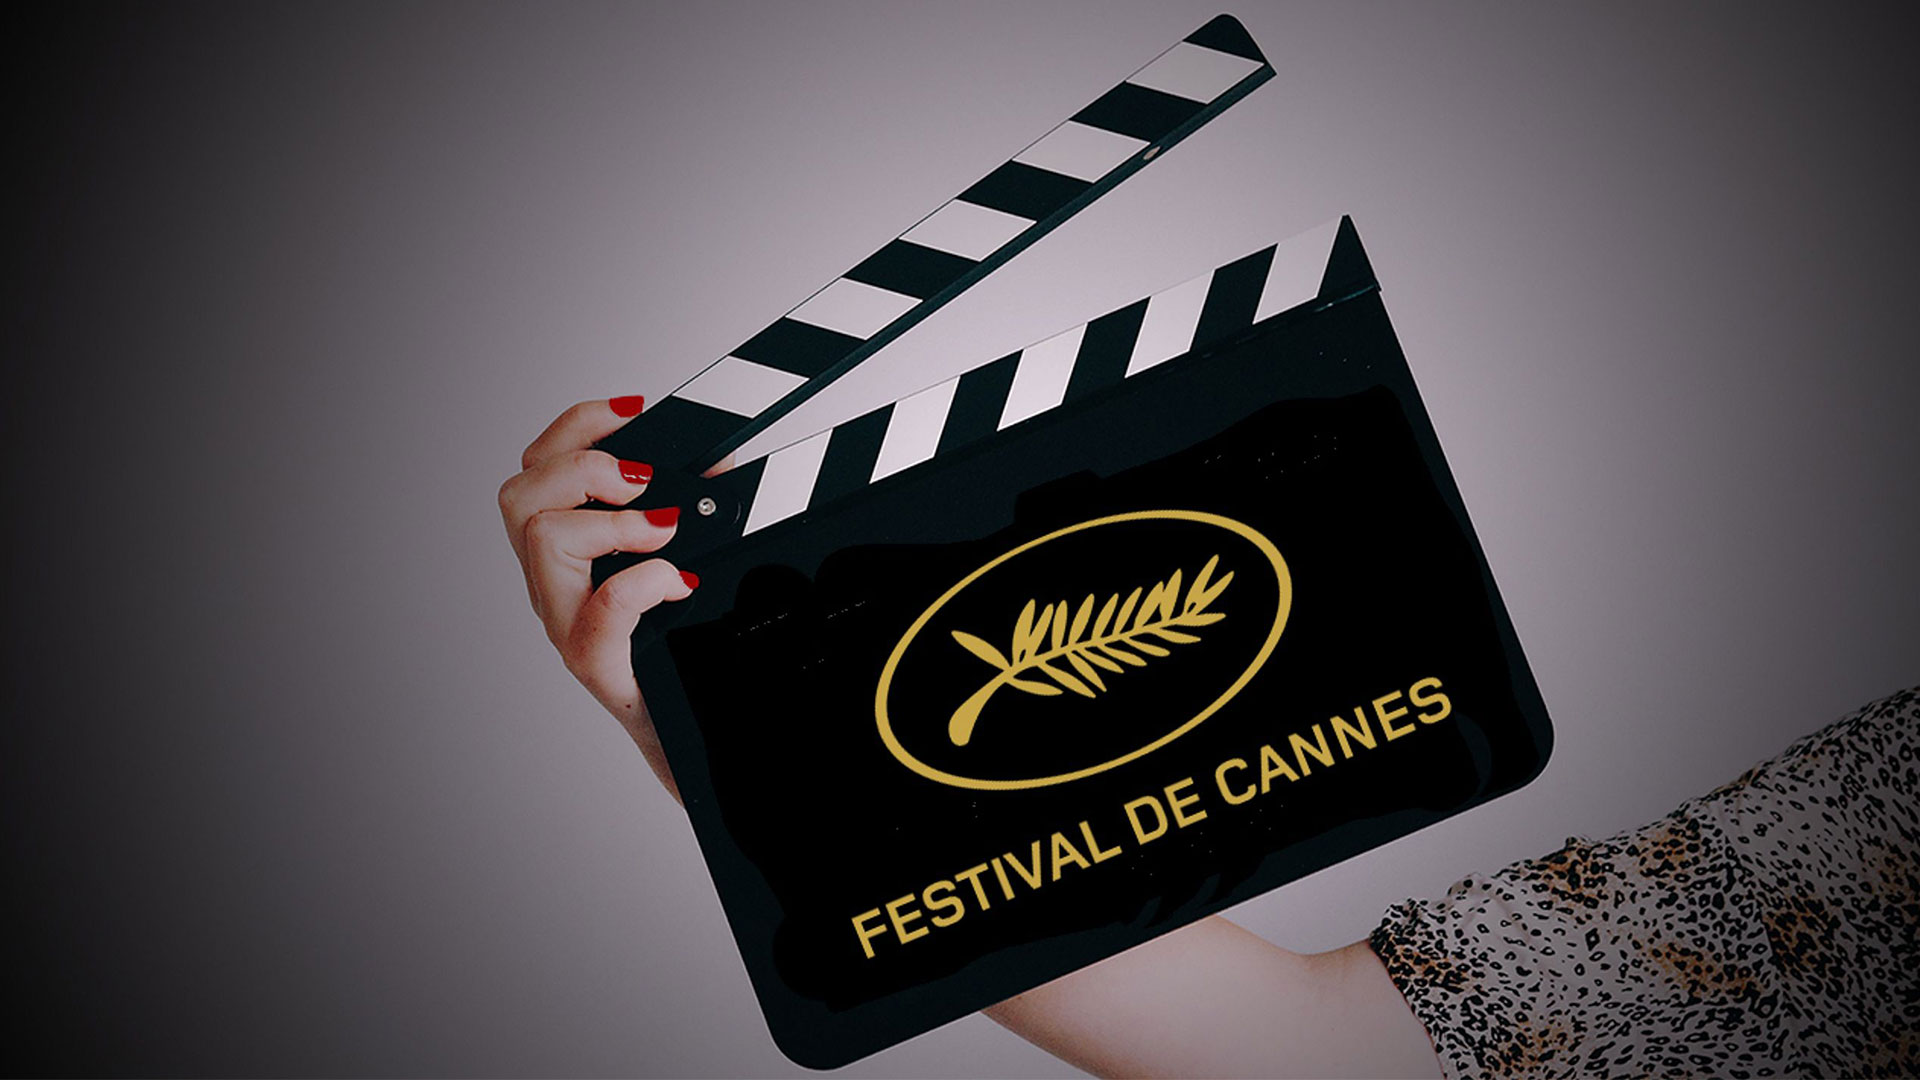 Cannes 2021